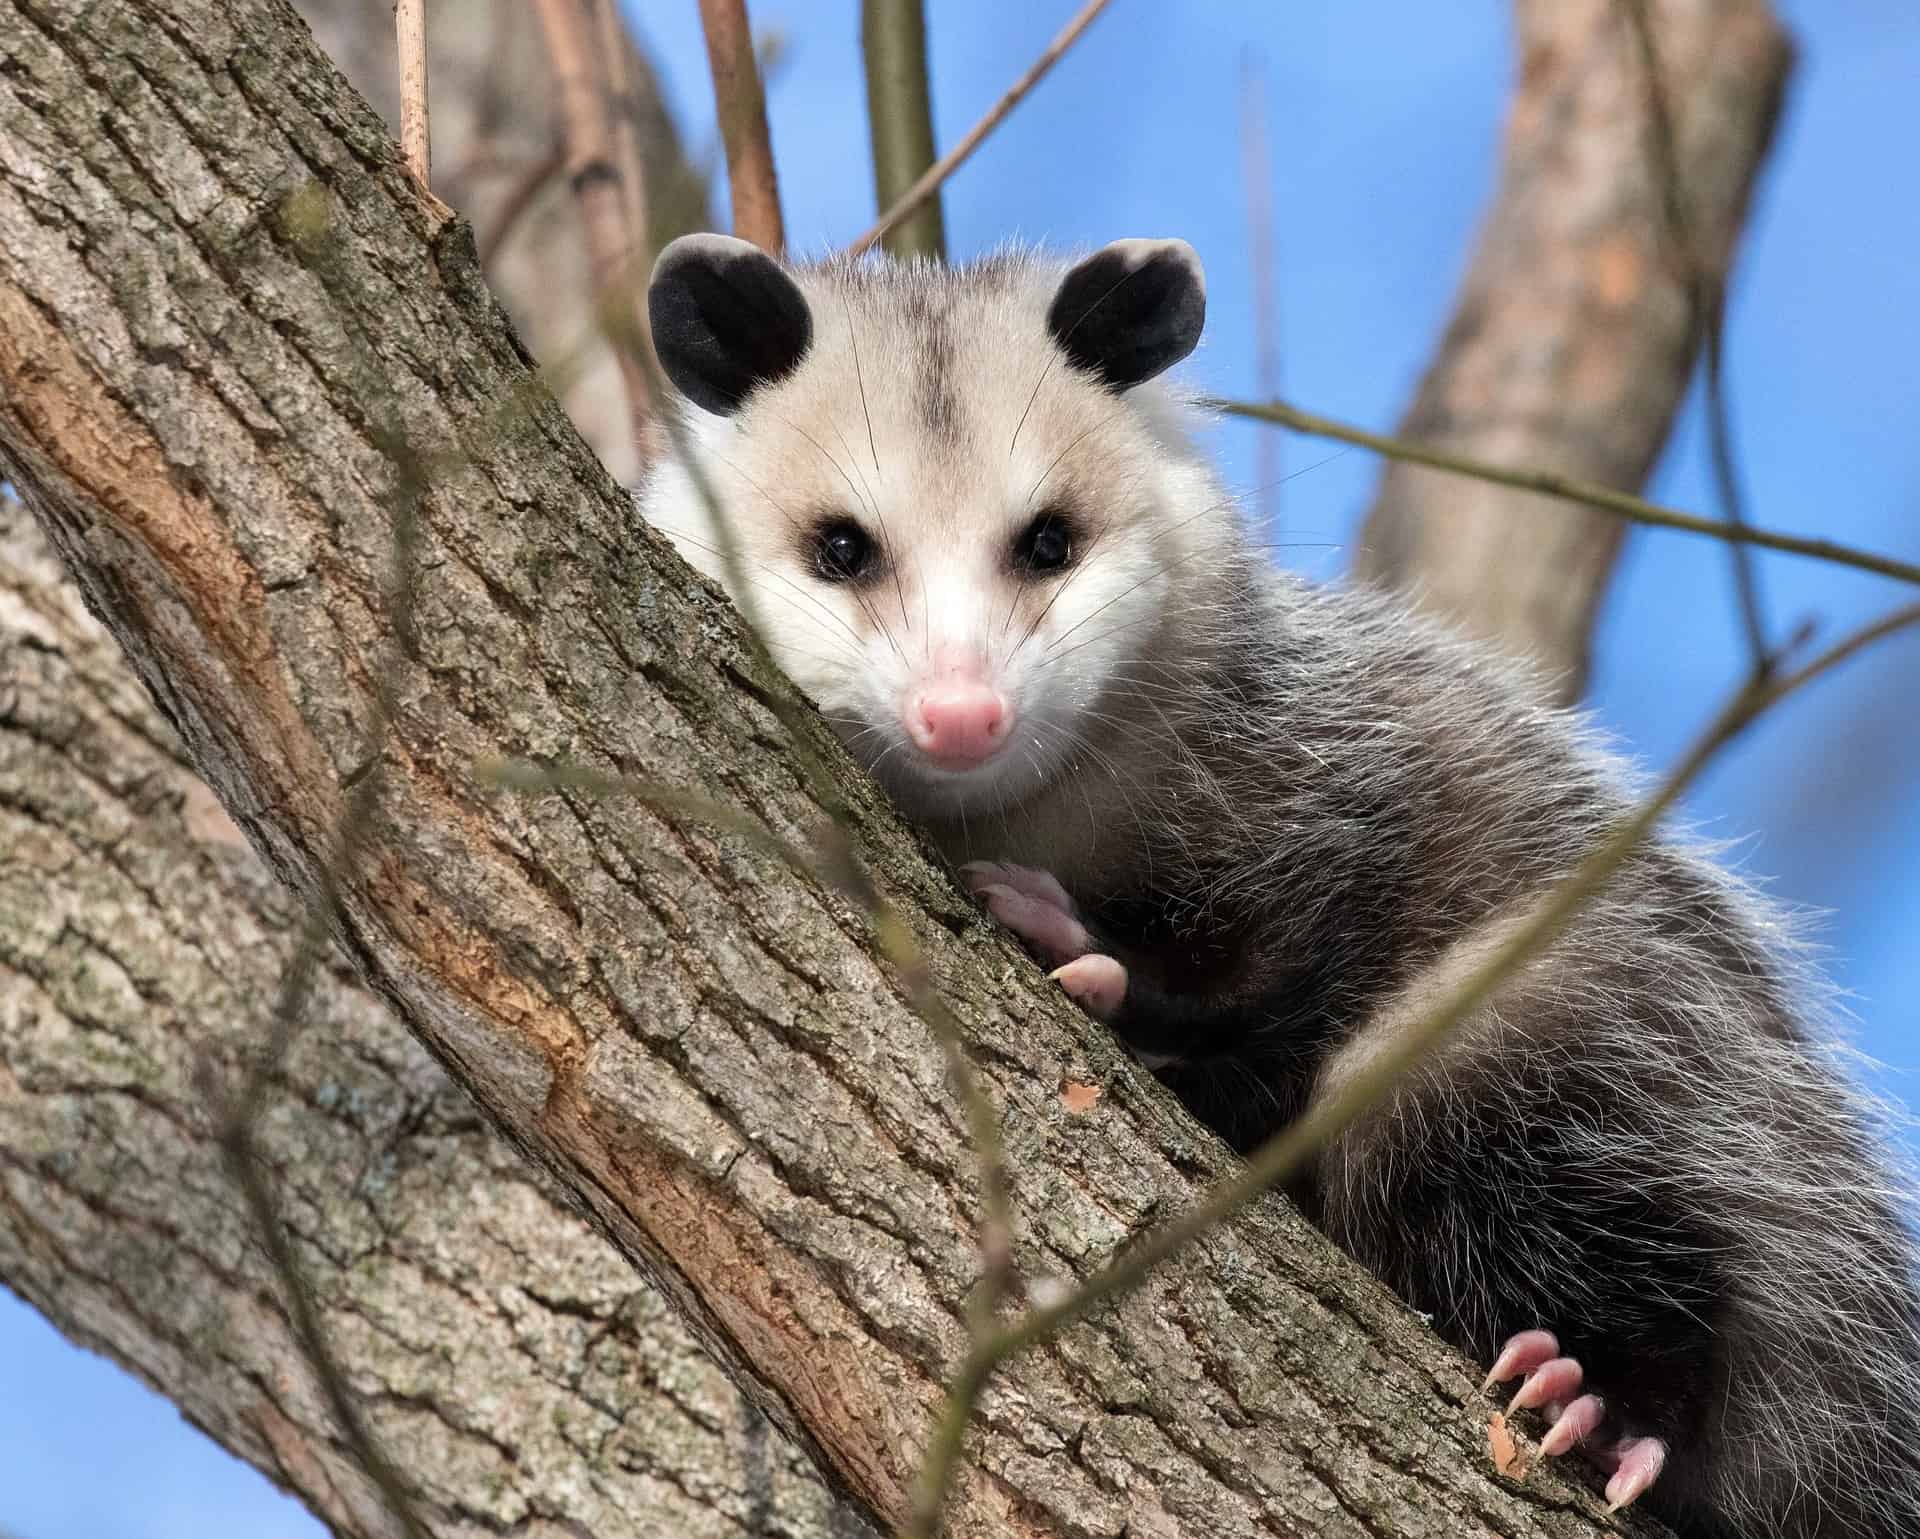 What Animal Hunts Opossums